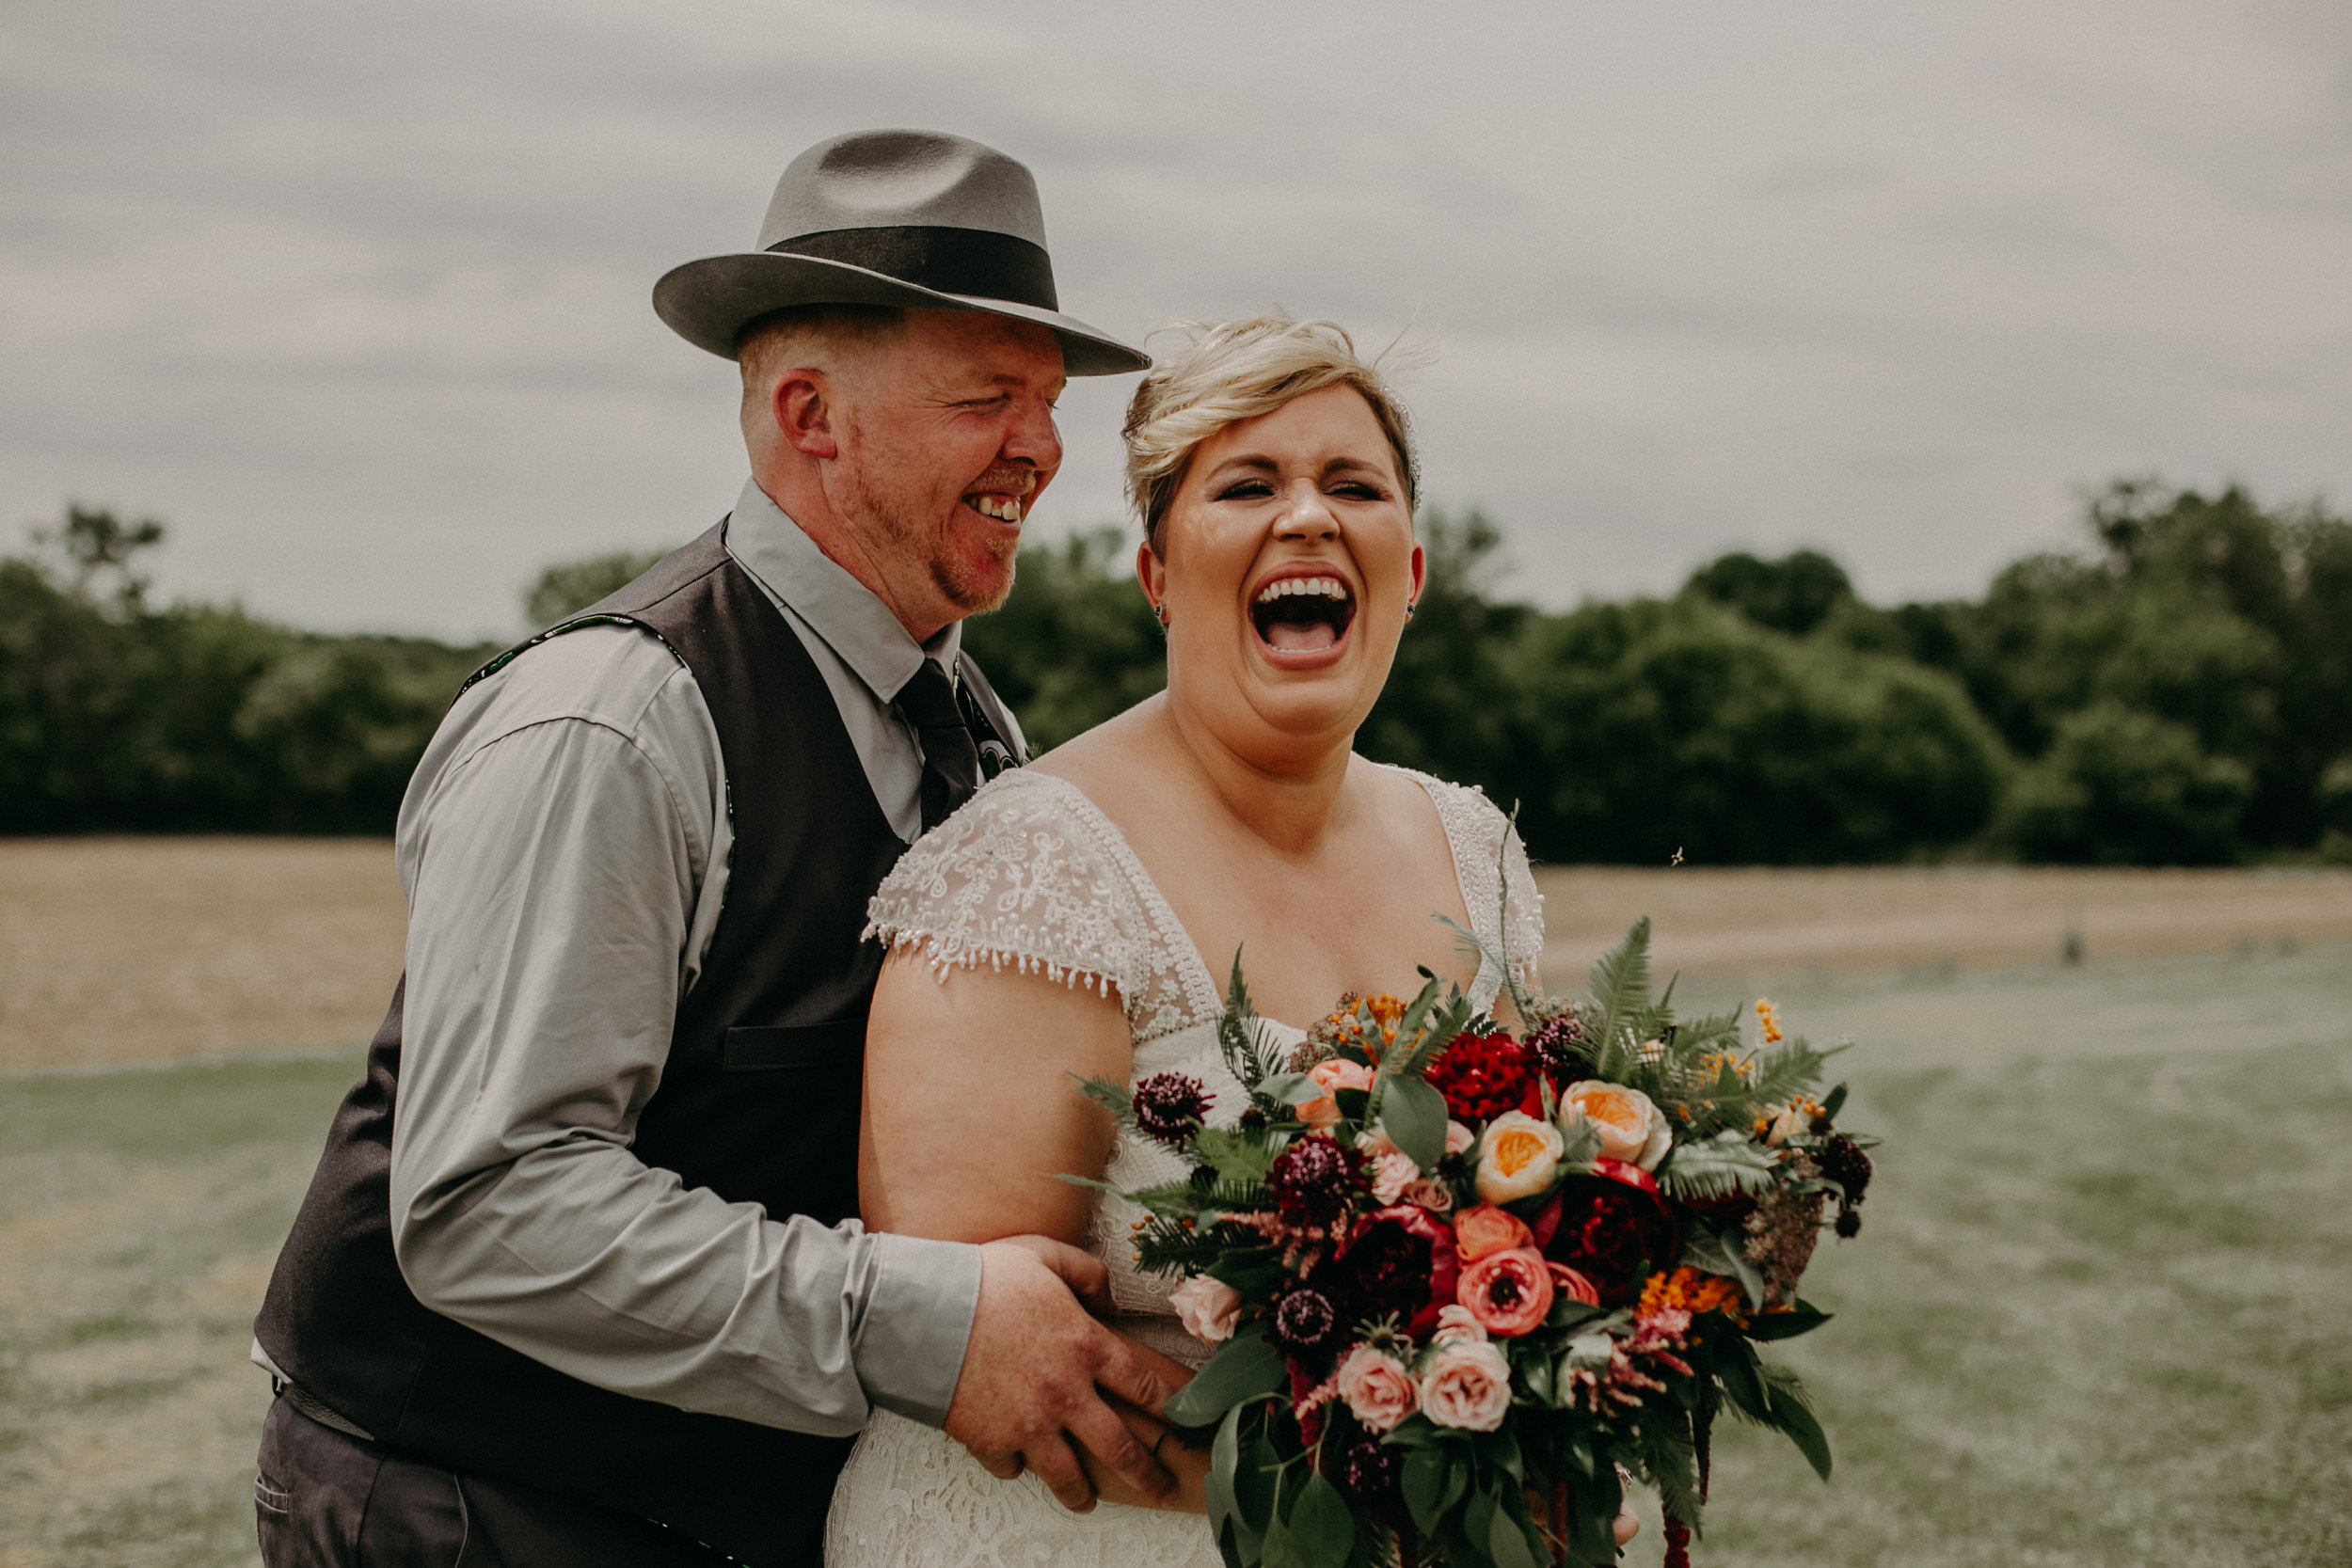  joyful and happy wedding day at Jean Acres Barn in Ellsworth WI captured by Andrea Wagner Photography 